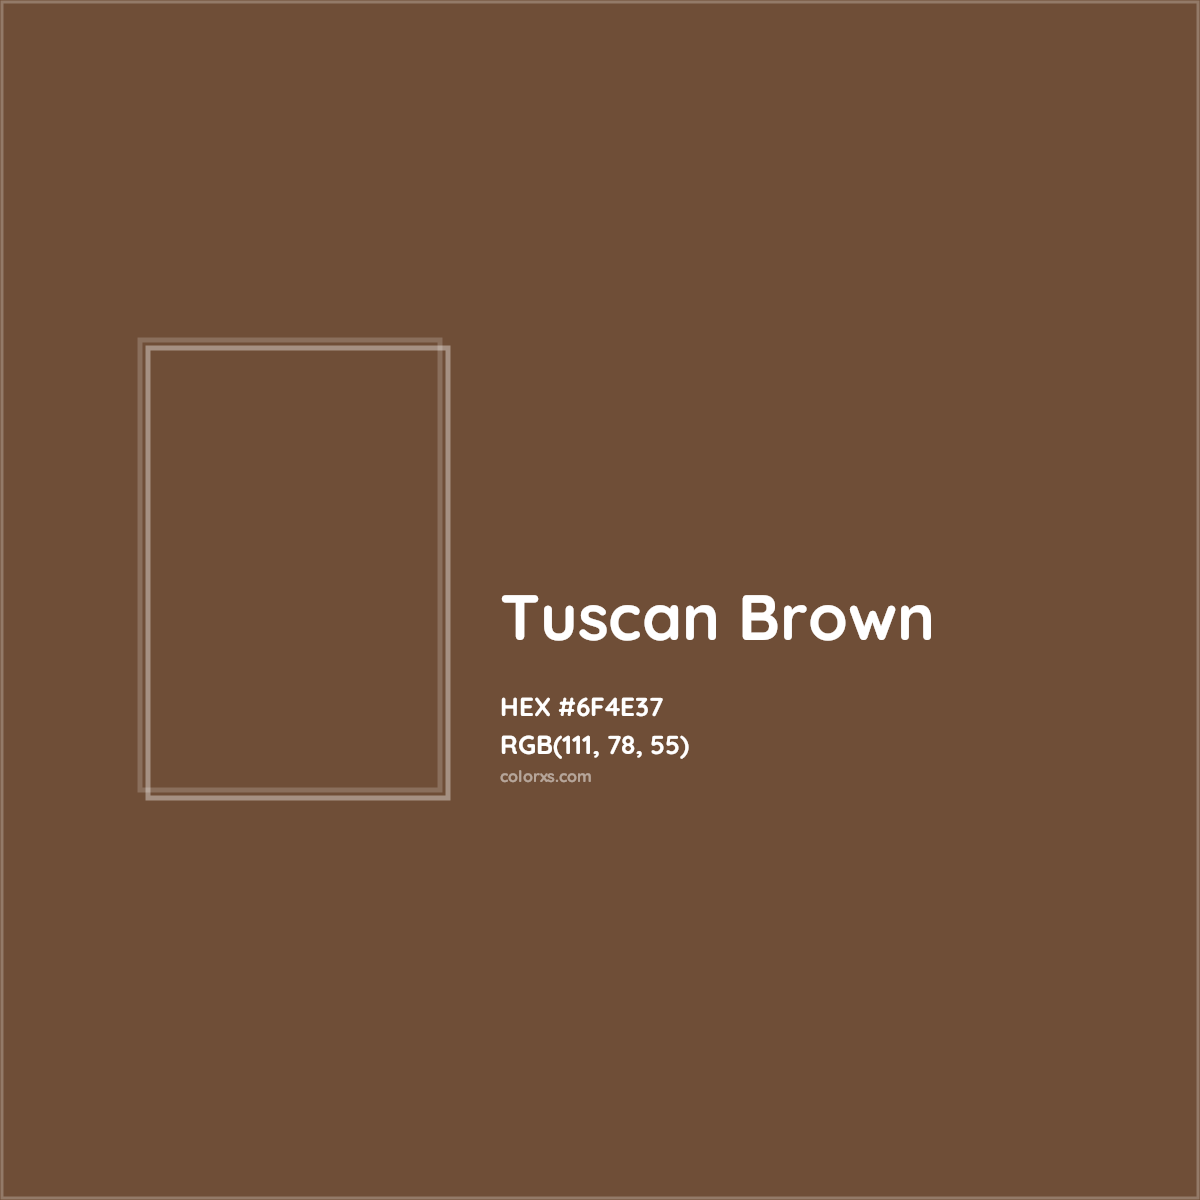 HEX #6F4E37 Tuscan Brown Color - Color Code